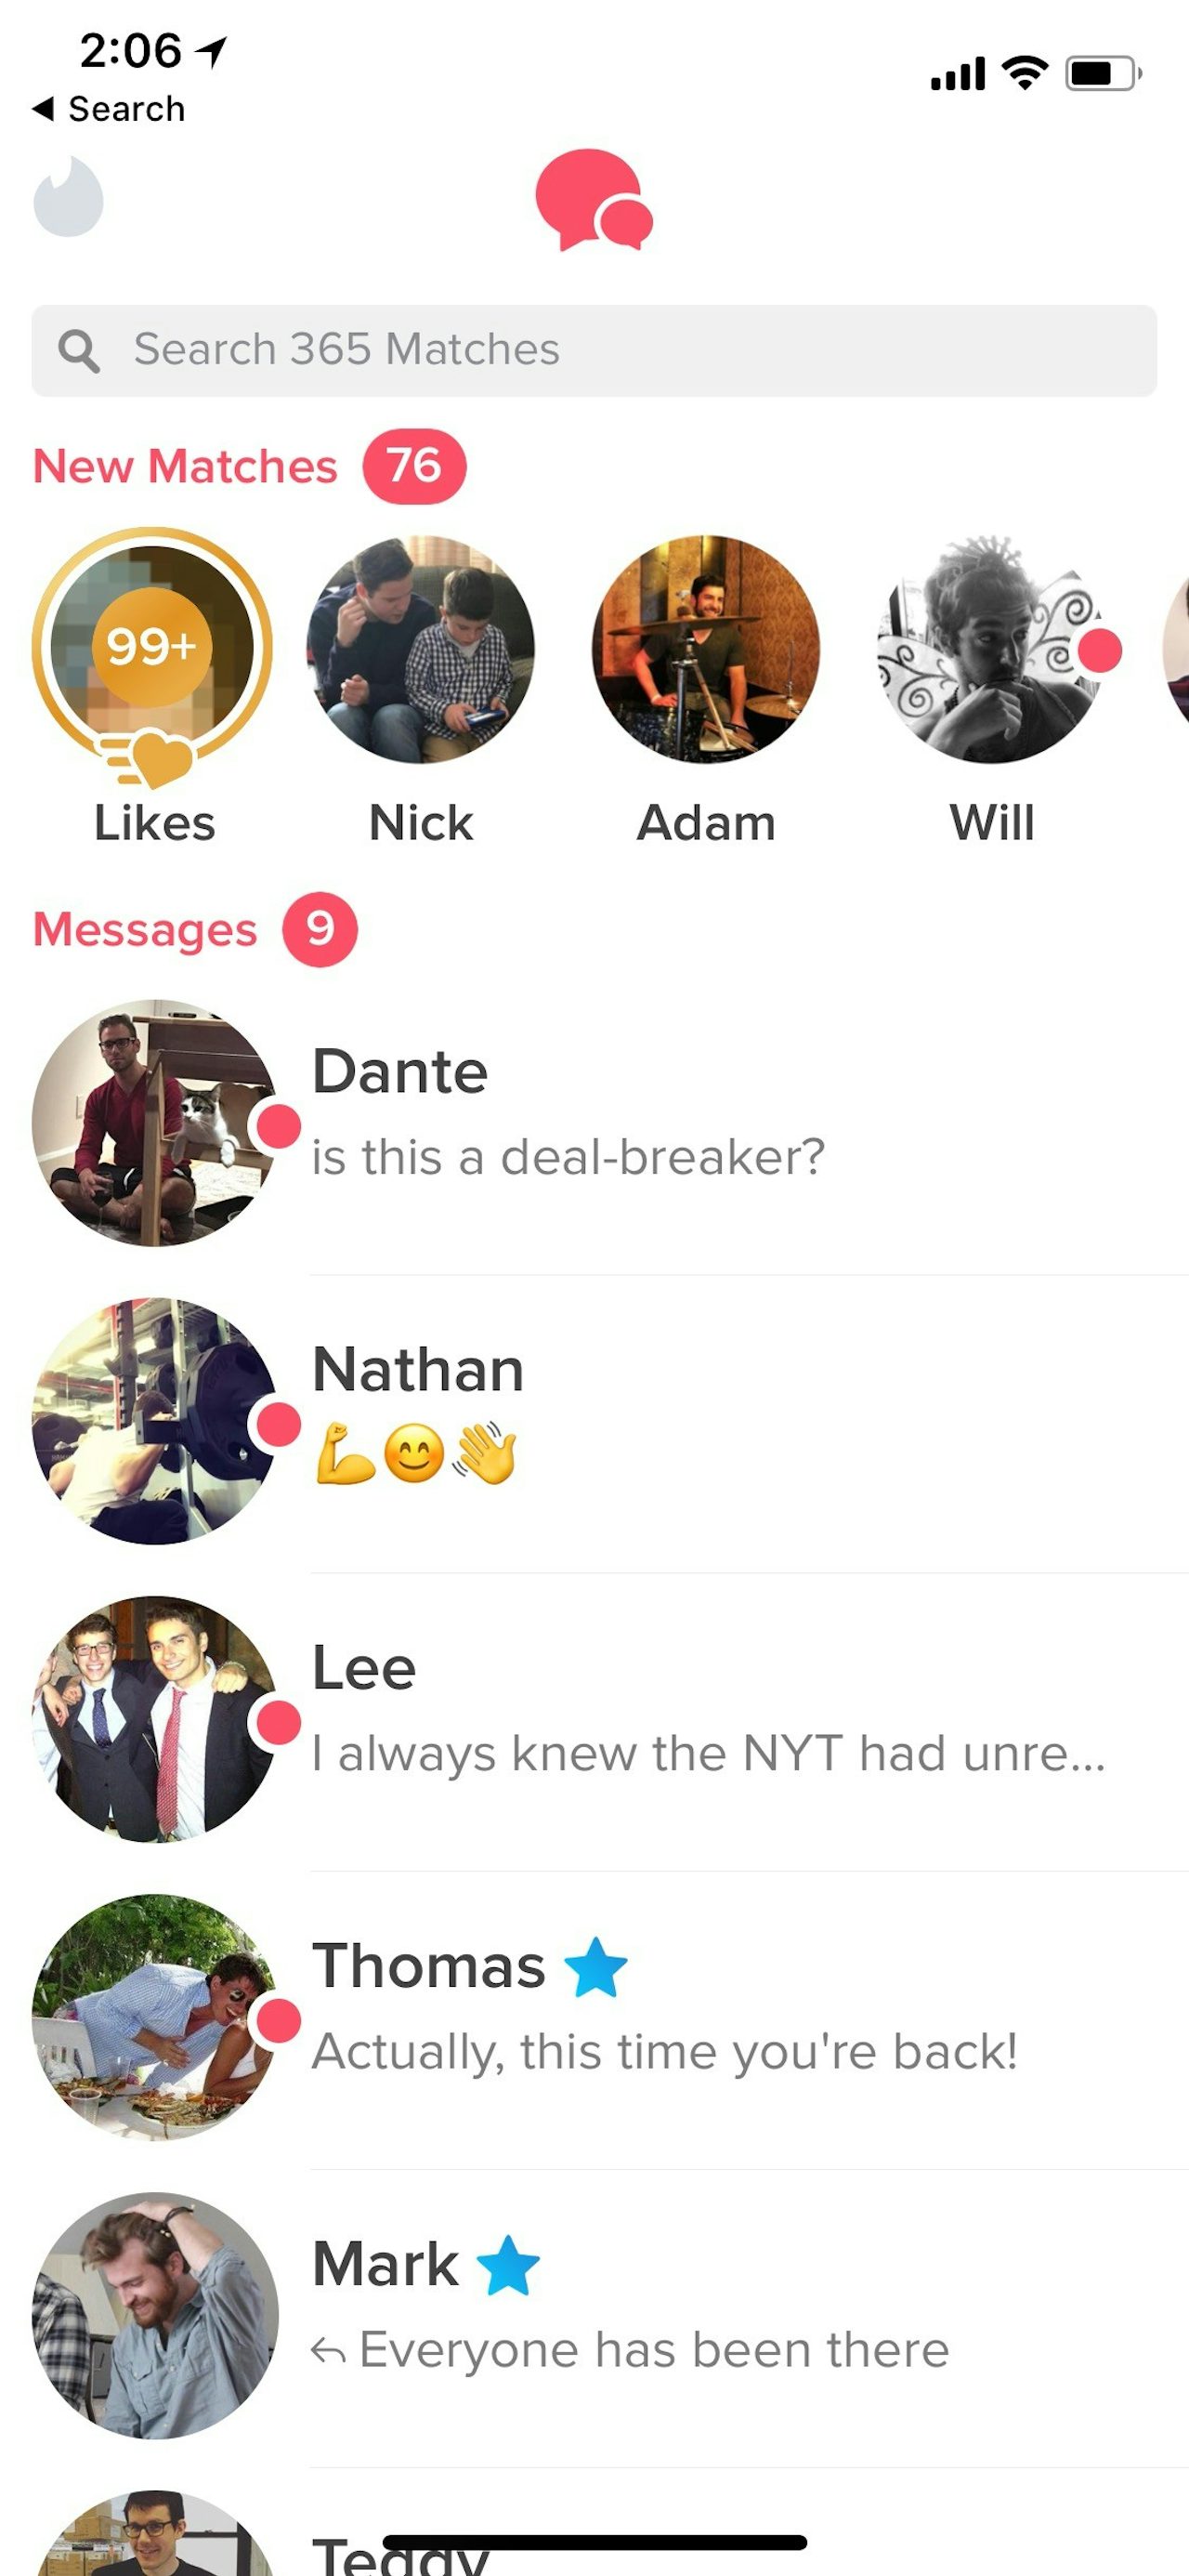 Matches successful tinder Case Study: